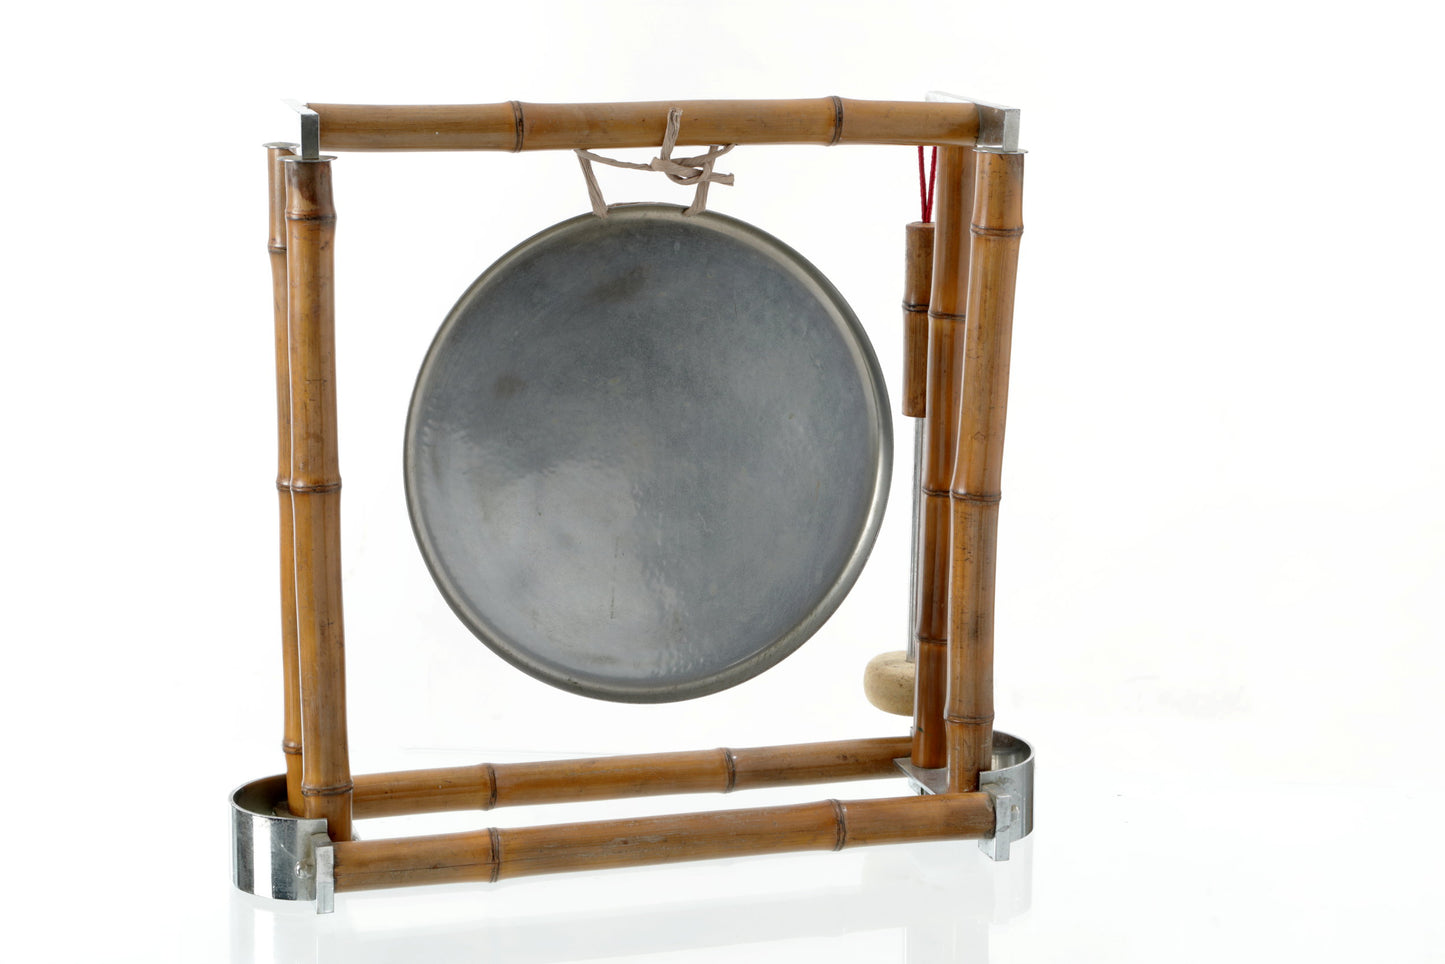 Oriental gong from the 1930s